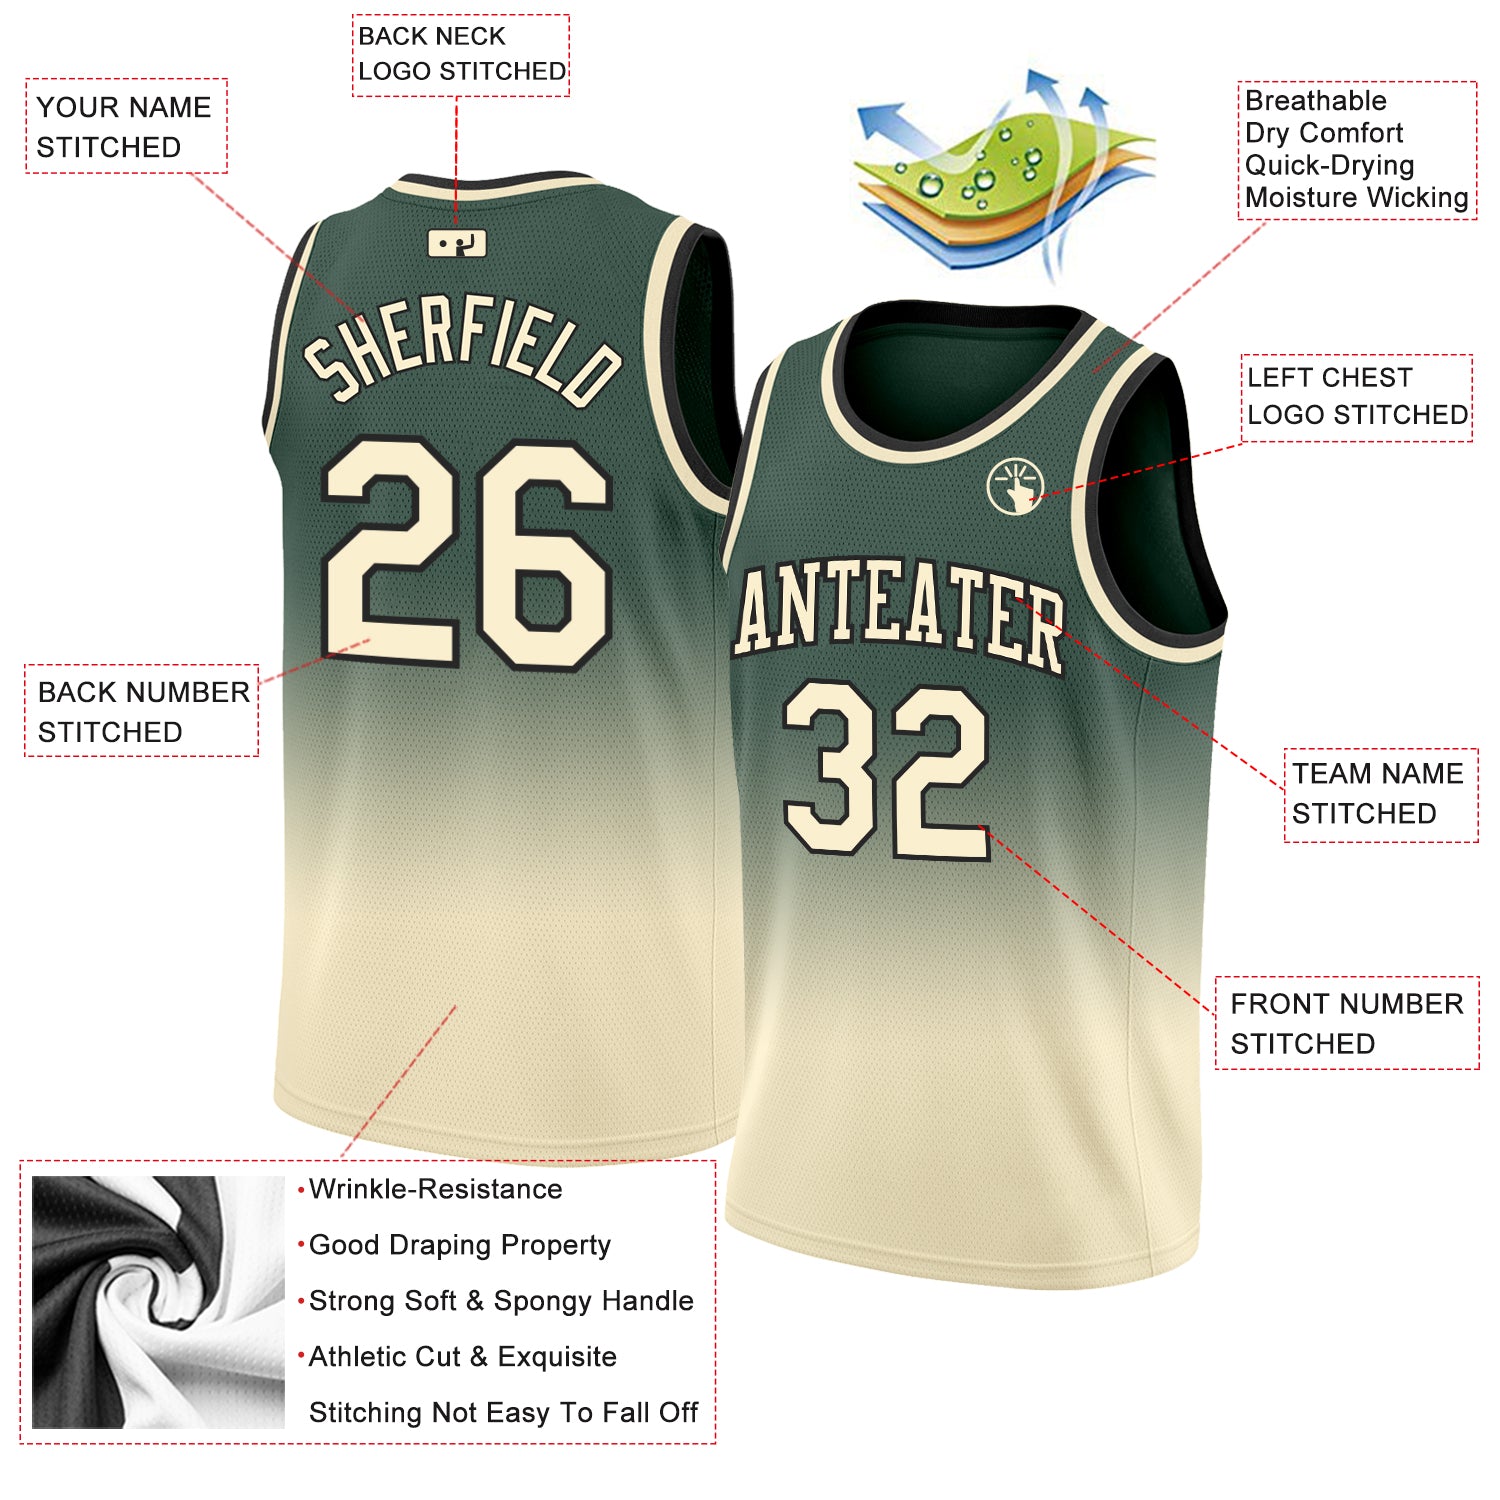 Custom Basketball Jersey Fan Jersey Fashion Basketball Jersey Printed Team  Name & Number Personalized Team Uniforms